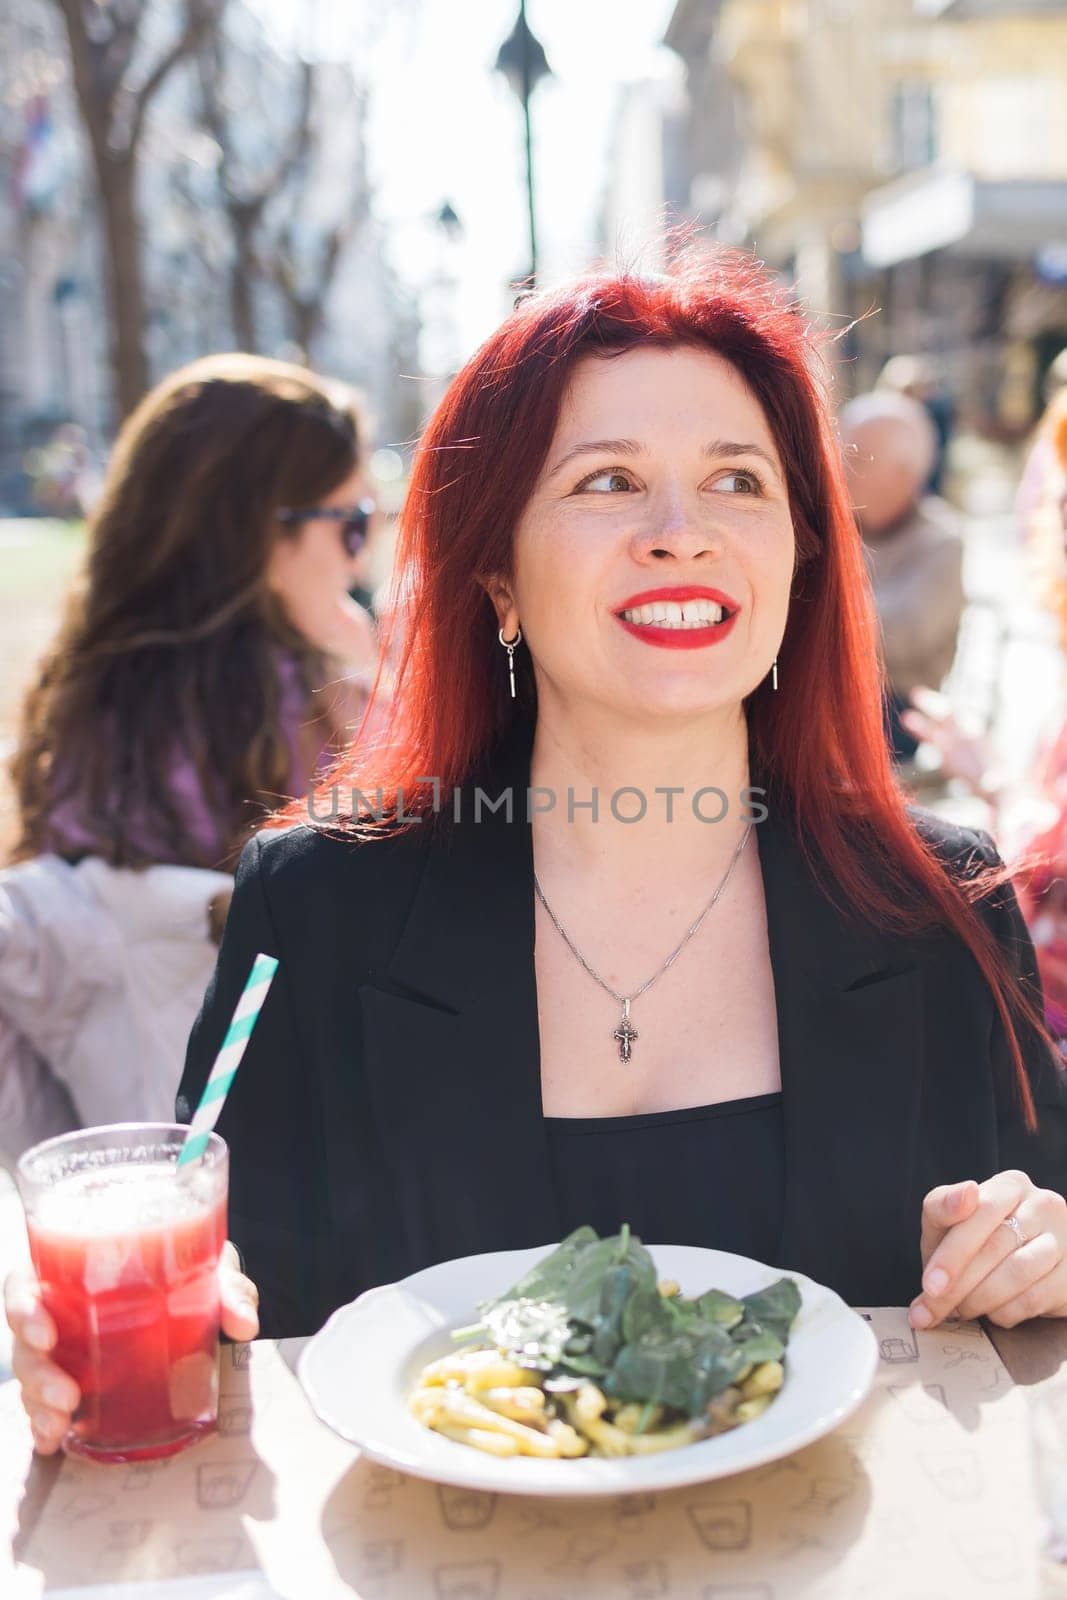 Millennial woman eating italian pasta at restaurant on the street in spring. Concept of Italian gastronomy and travel. Stylish woman with red hair.